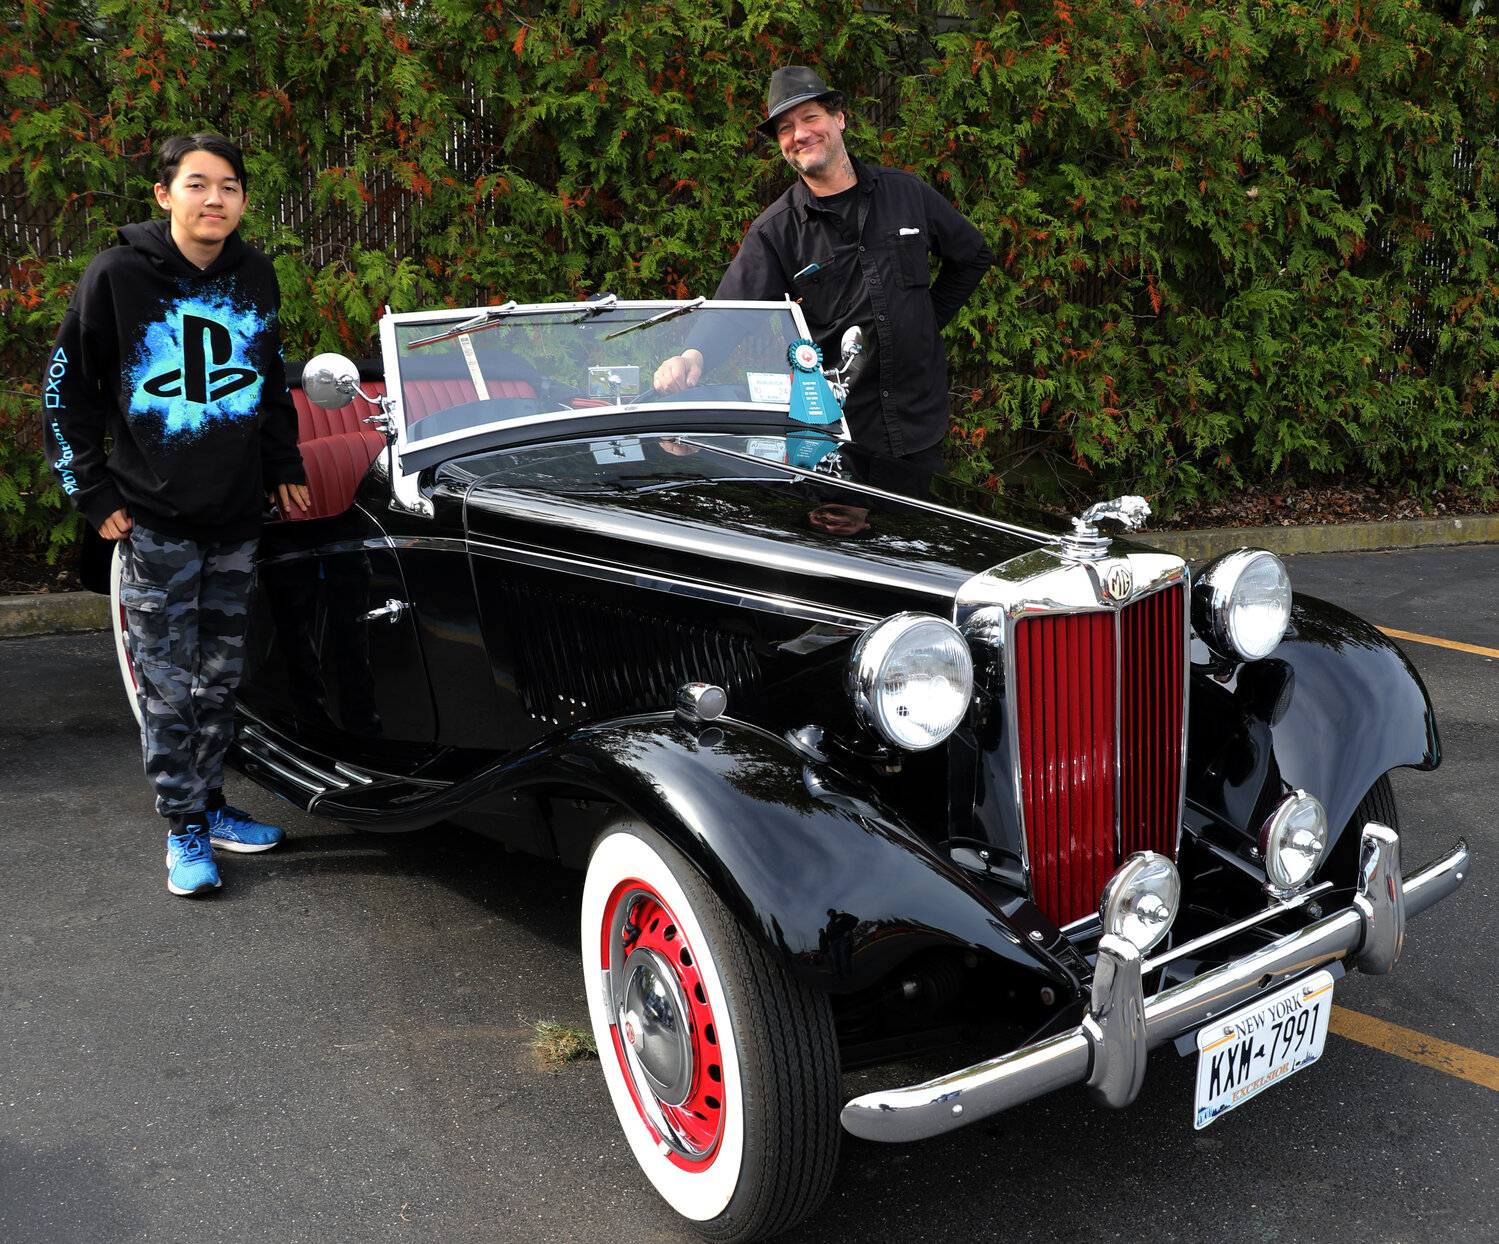 Jeff Rogan with his son Leander aside a 53’ MG TD INSPIK.